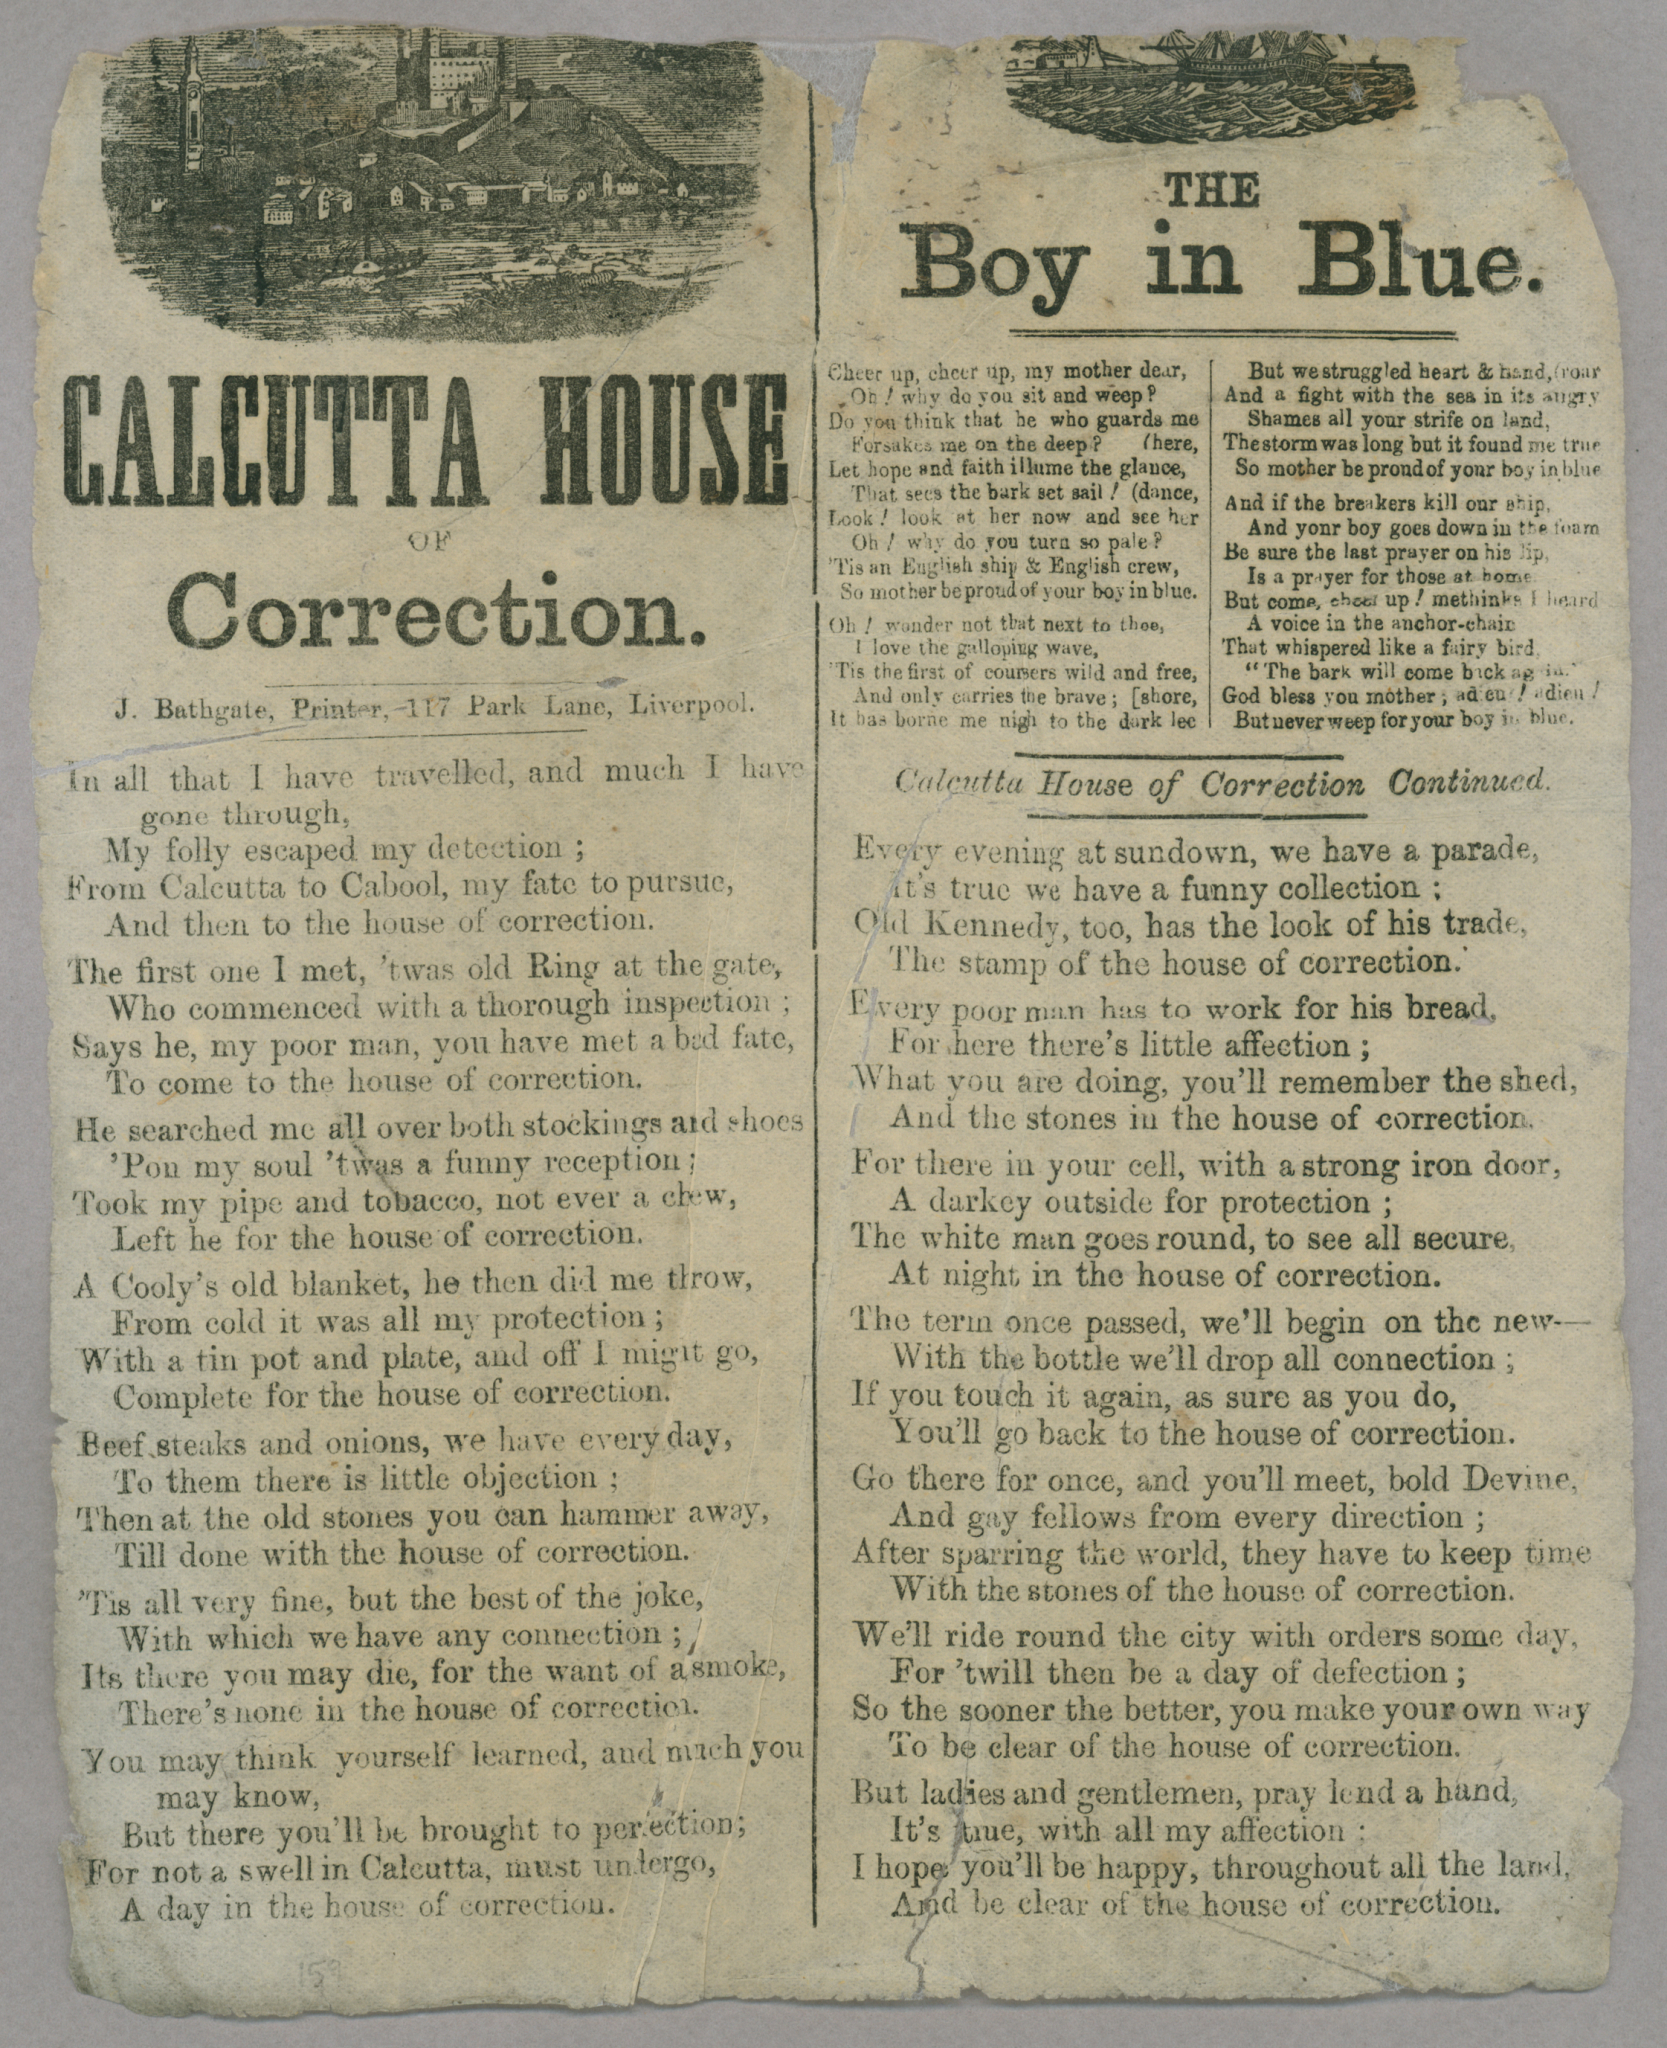 &quot;Calcutta House of Correction,&quot; and &quot;The Boy in Blue&quot;